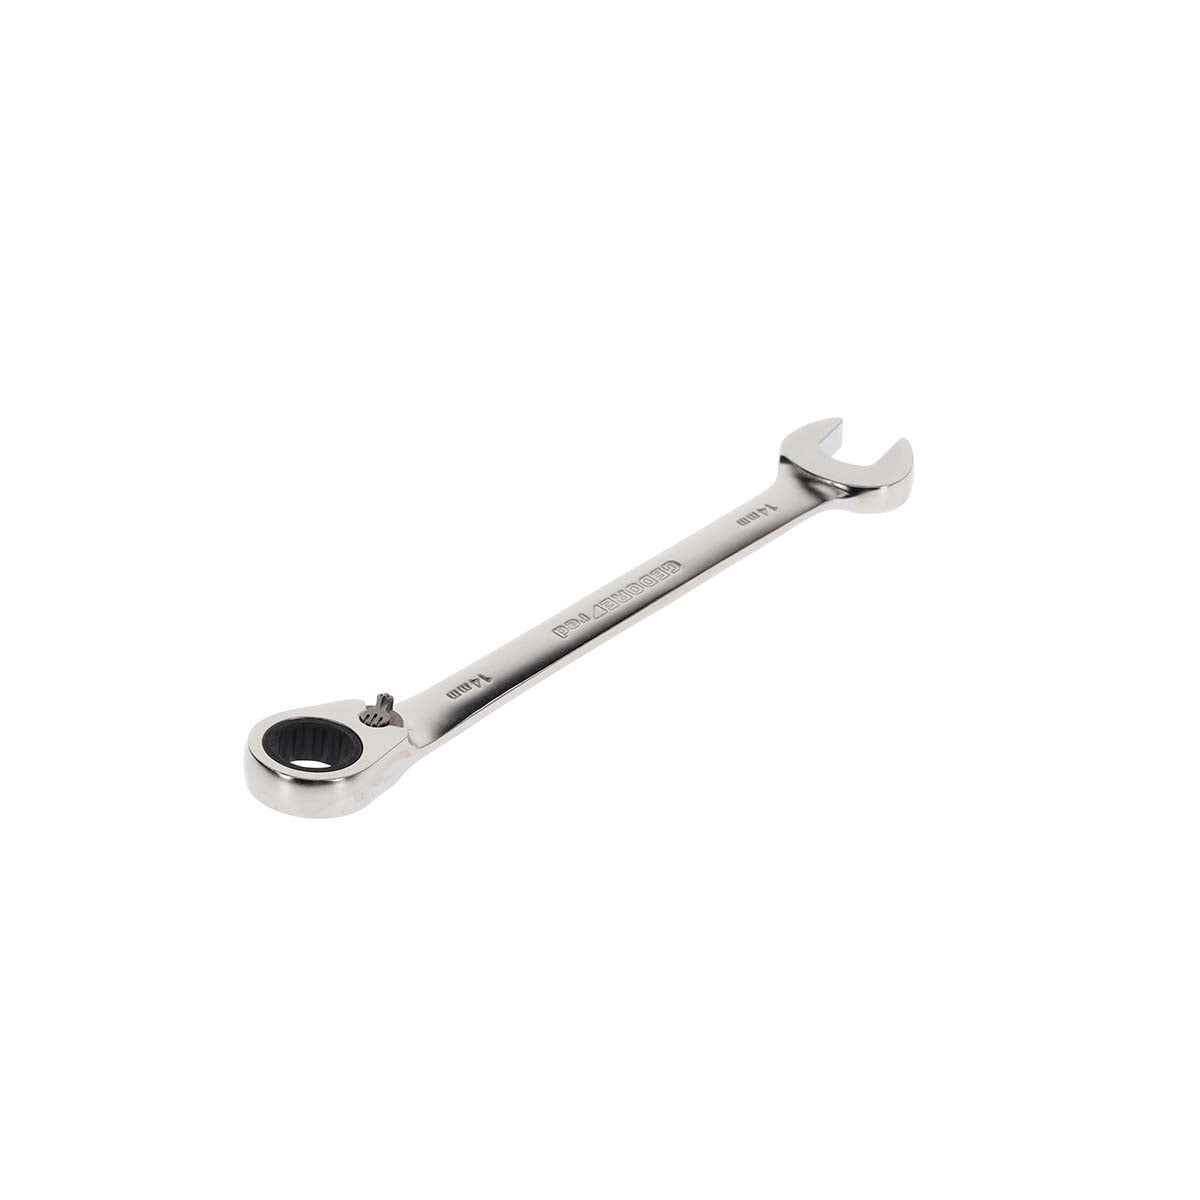 GEDORE red R07200140 - Ratchet combination wrench with shift lever, 14 mm L=190 mm (3300857)